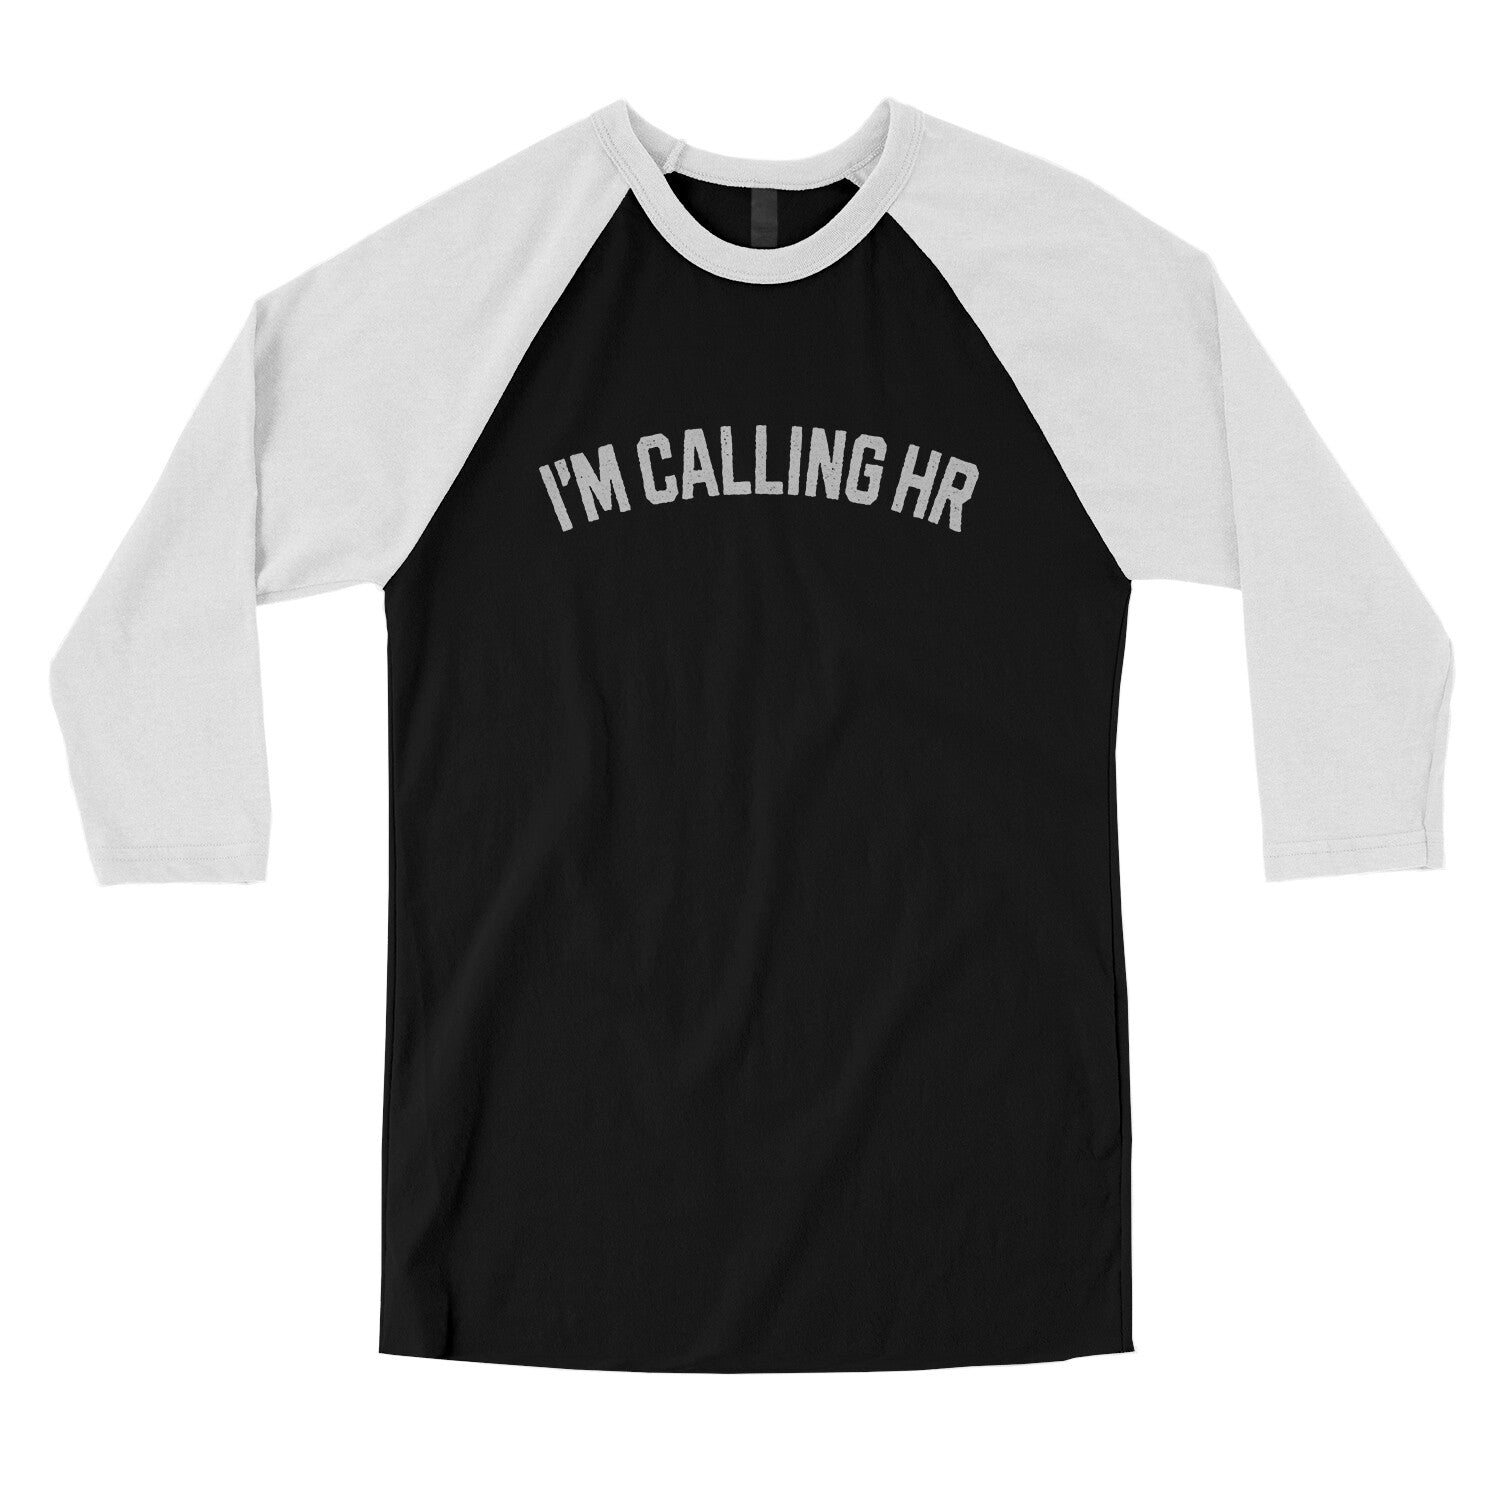 I'm Calling HR in Black with White Color